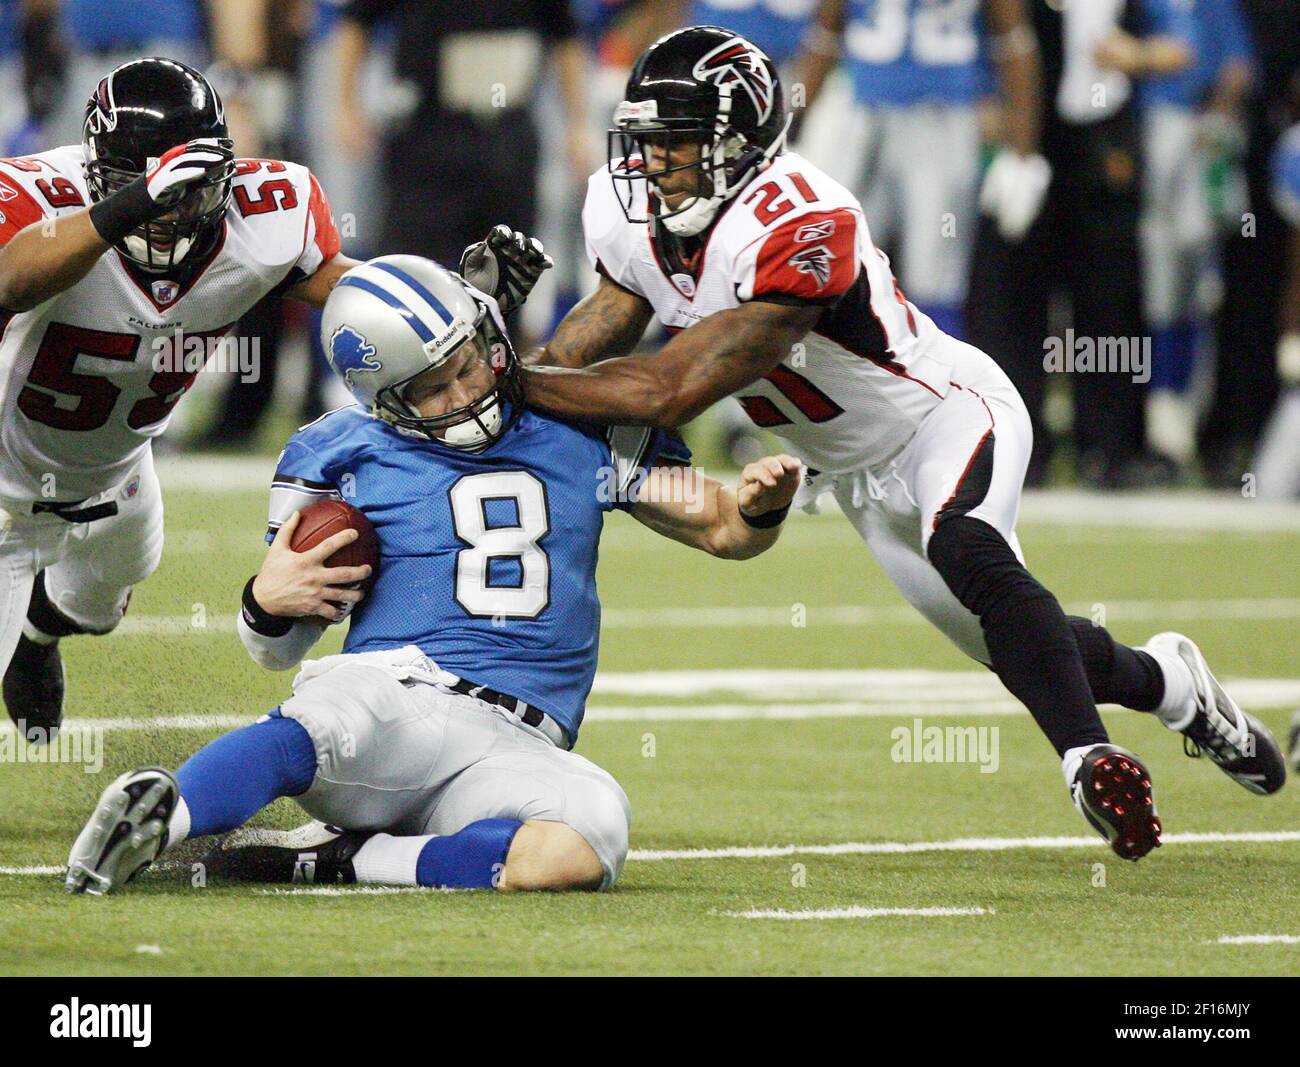 Detroit Lions quarterback Jon Kitna (8) gets hit by Atlanta Falcons  defender DeAngelo Hall (21) during the third quarter. Hall was called for a  personal foul and charged with a 15-yard penalty